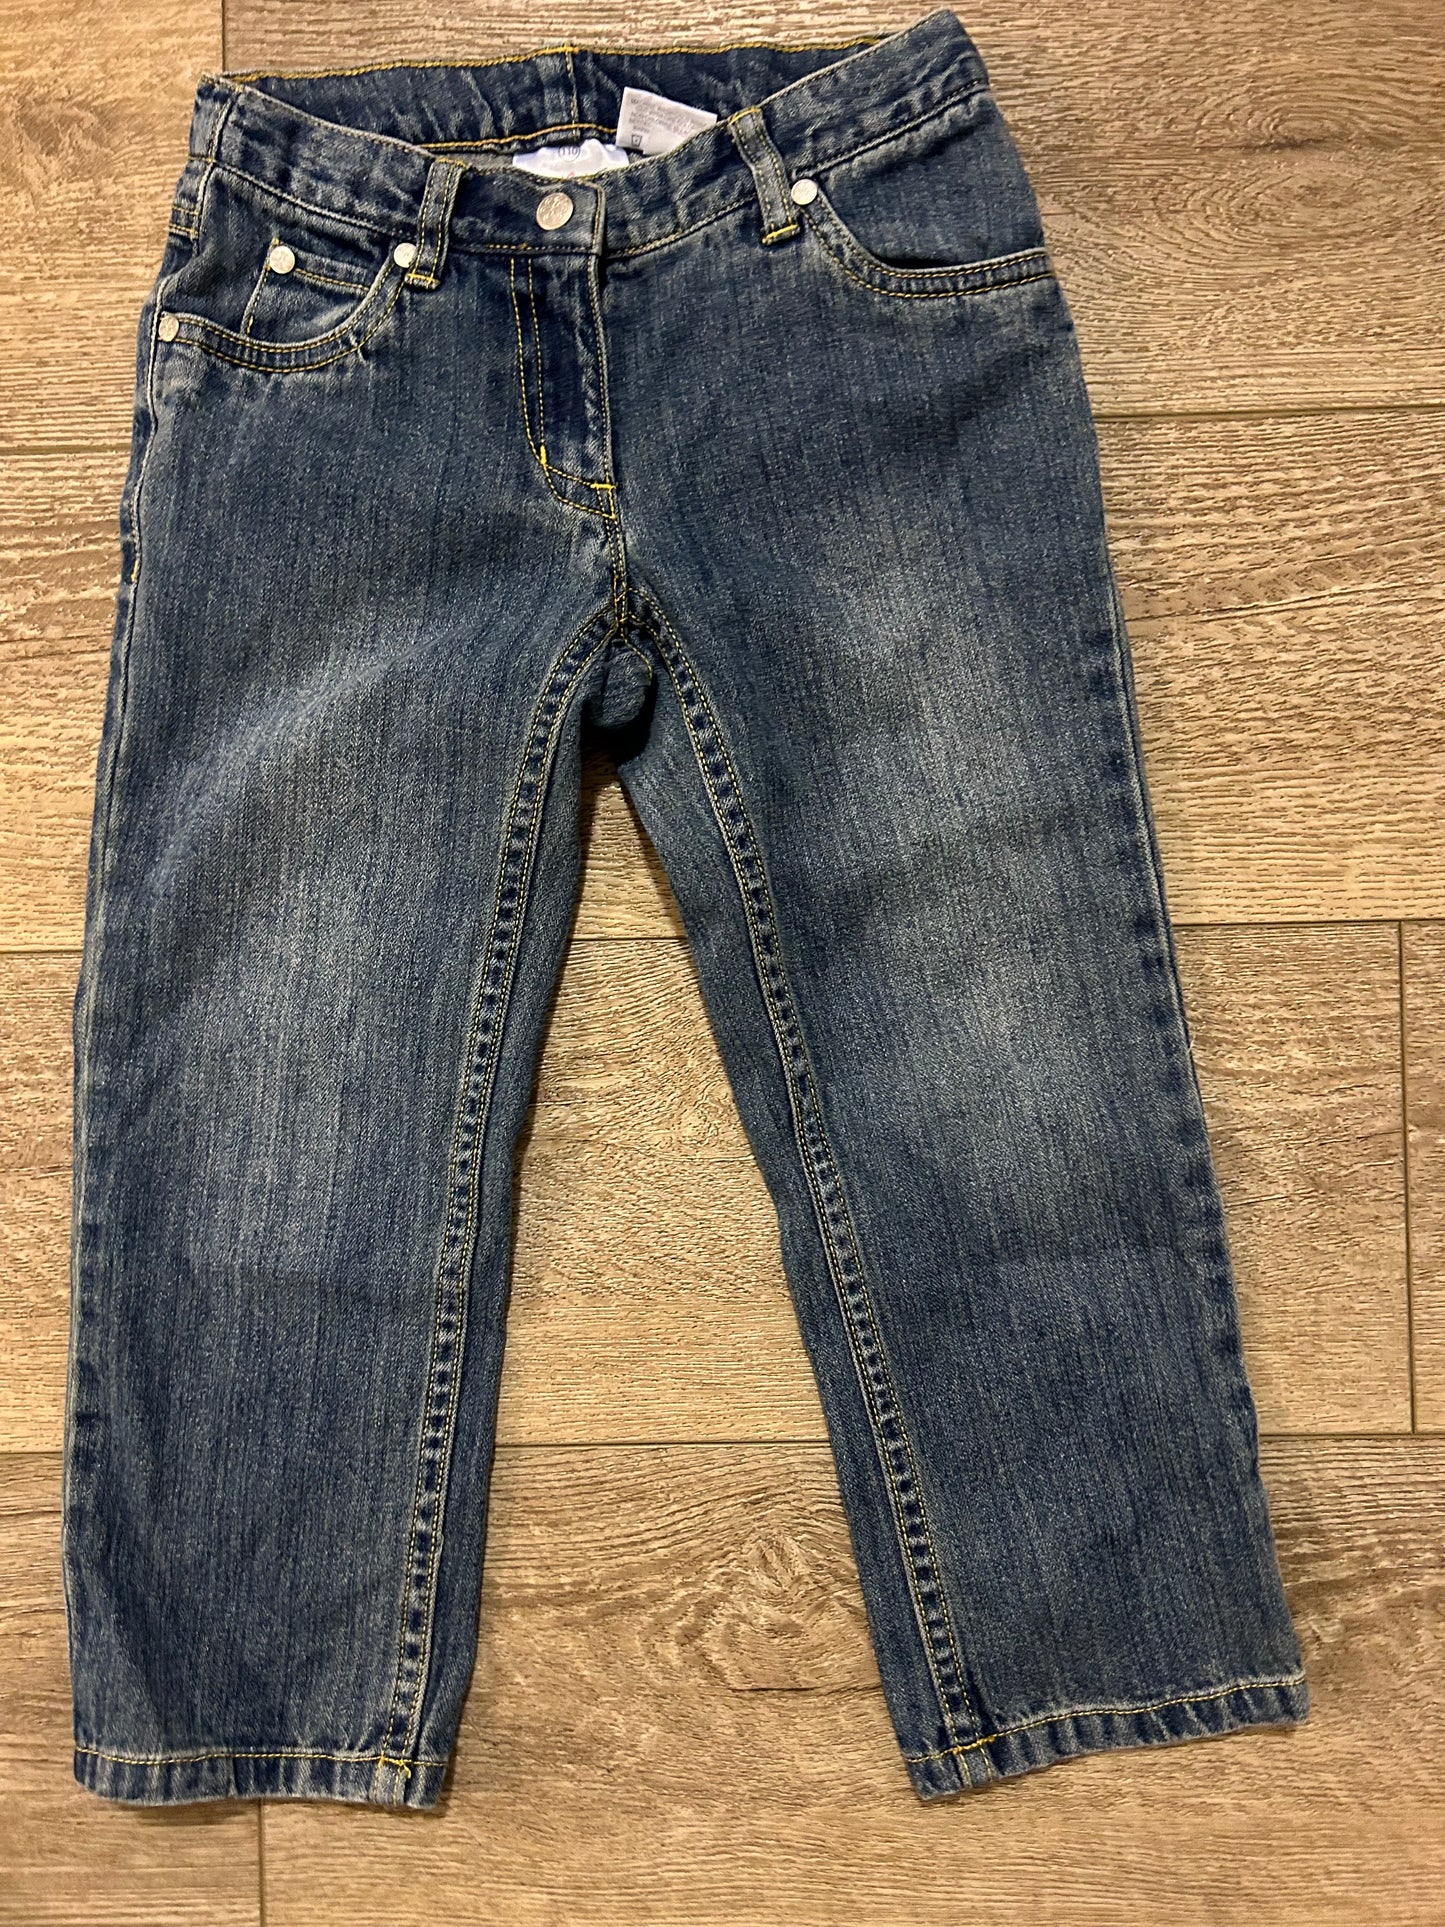 Girls 5 Hanna Andersson Straight Cut Jeans